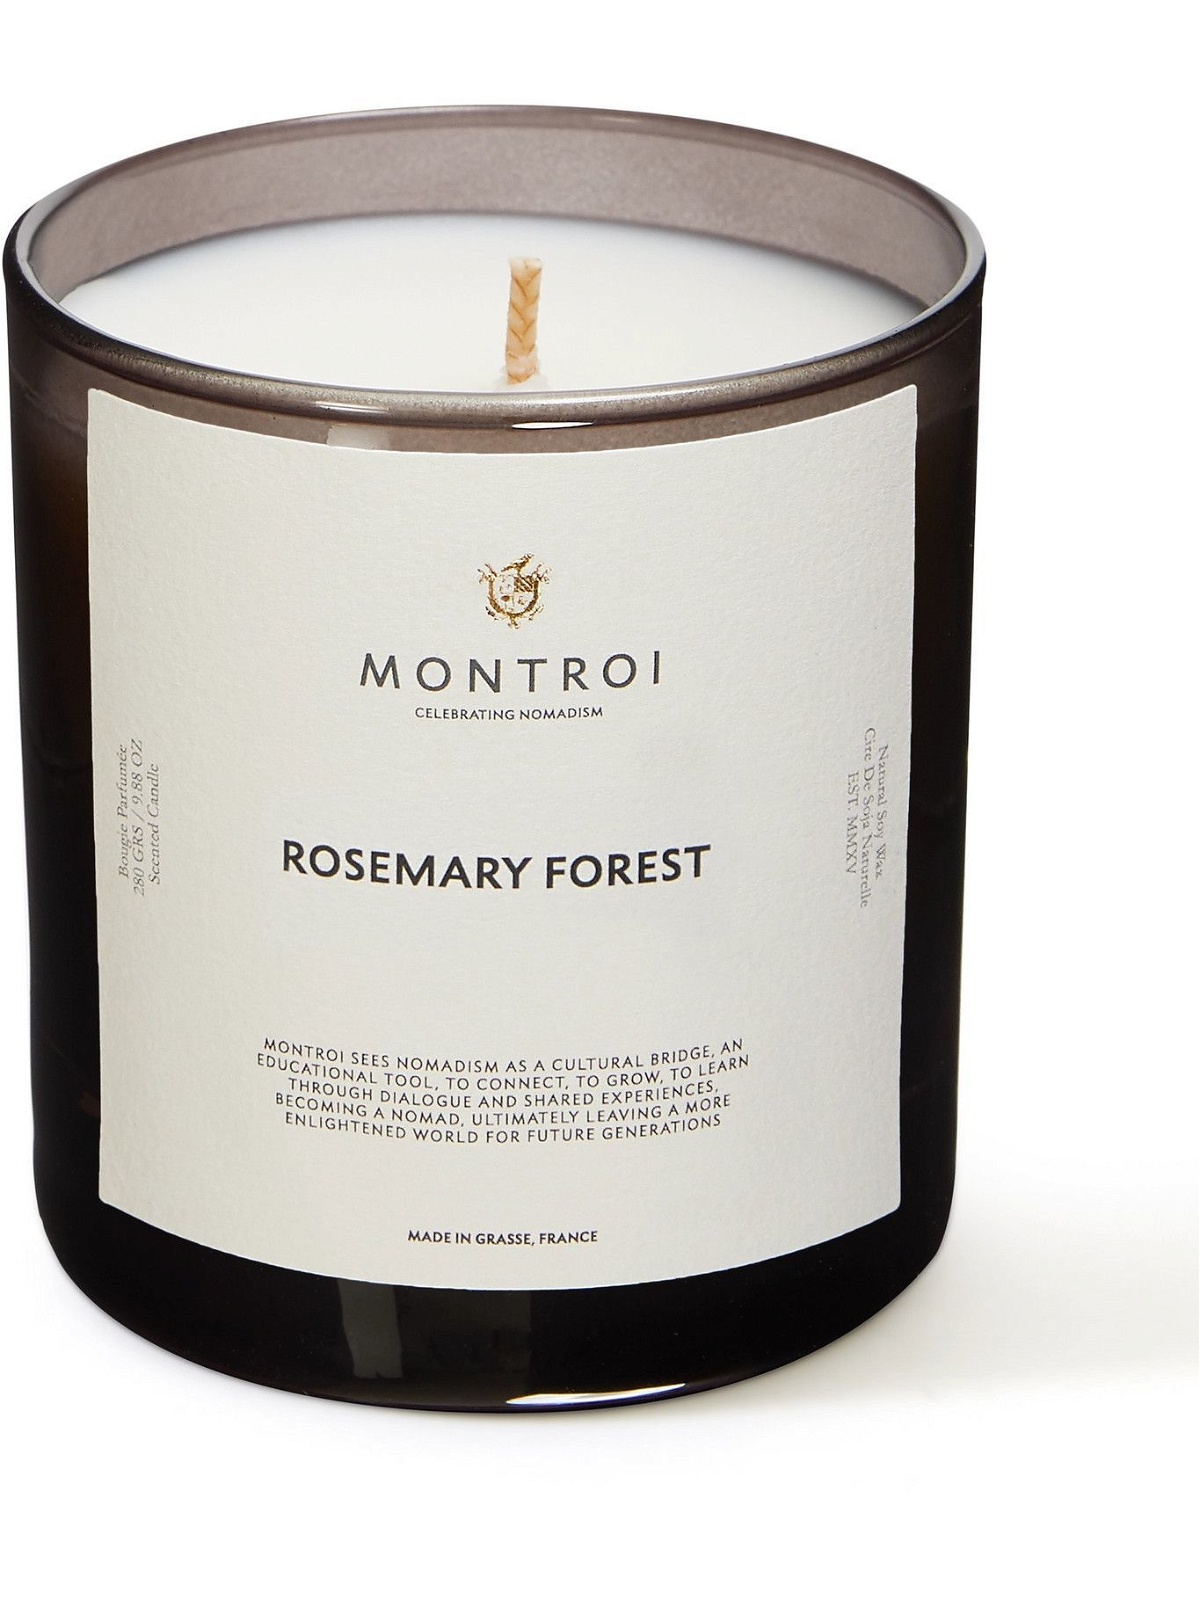 Photo: MONTROI - Rosemary Forest Scented Candle, 280g